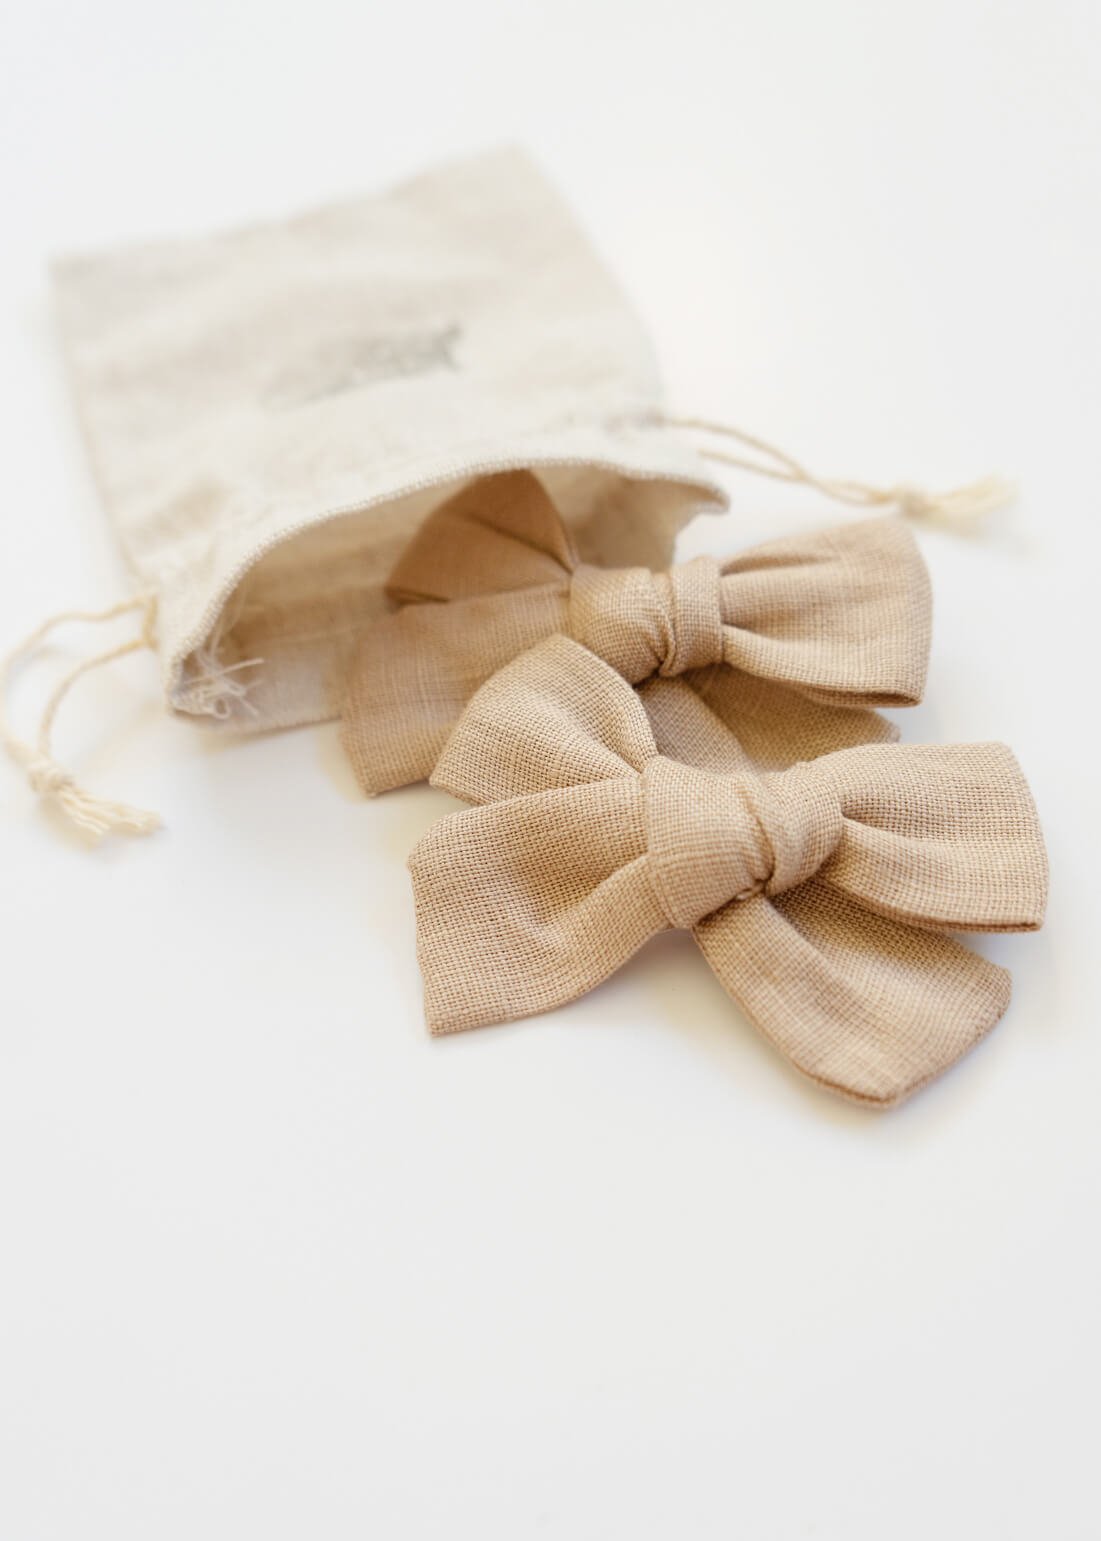 PENNY 2-Piece Bow Clips - Natural Hessian - Rocco & The Fox